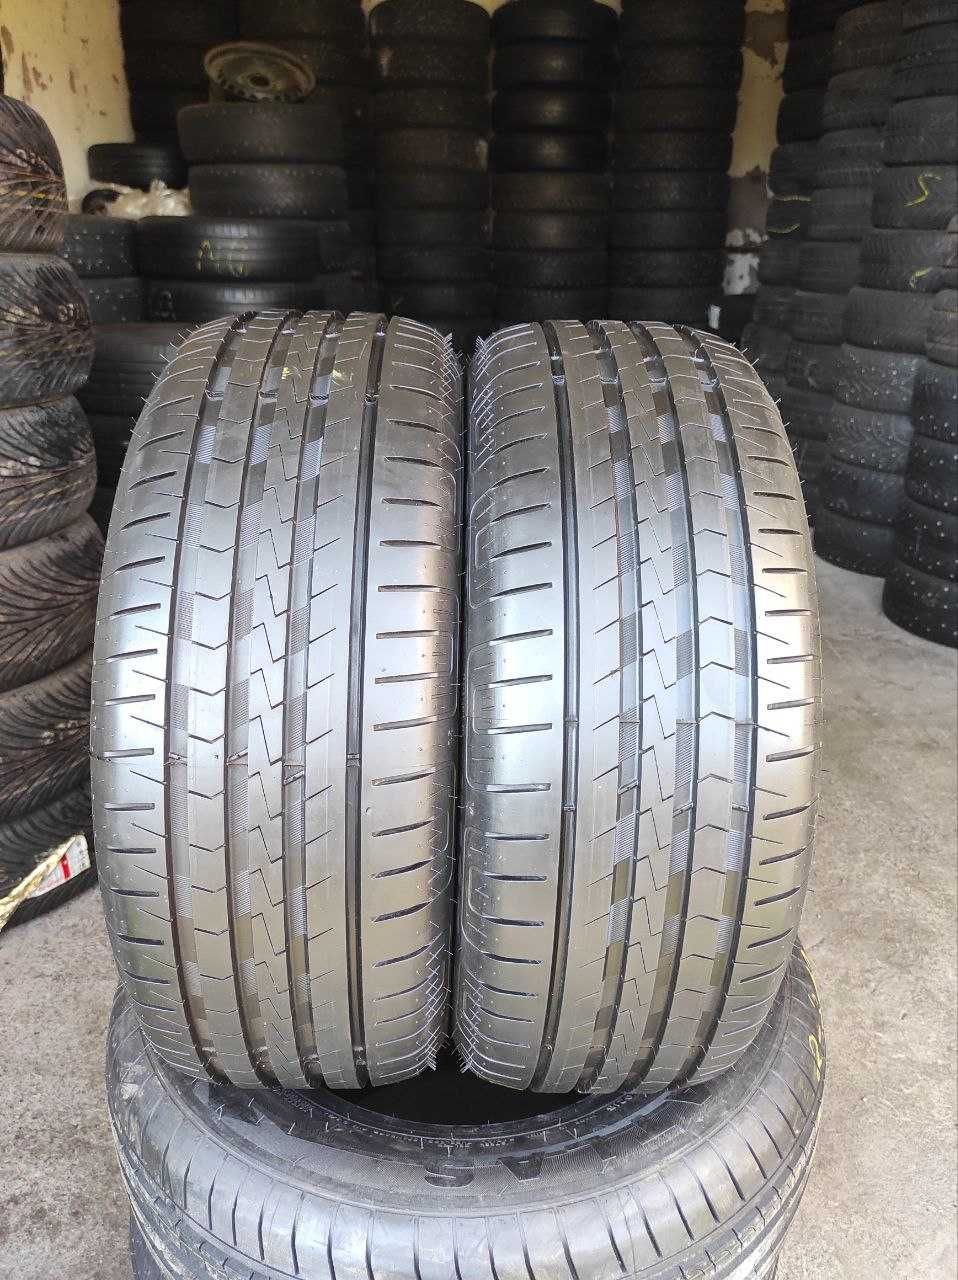 Vredestein Sportrac 5 205/55r15 made in The Netherlands 16год, 7,3мм,